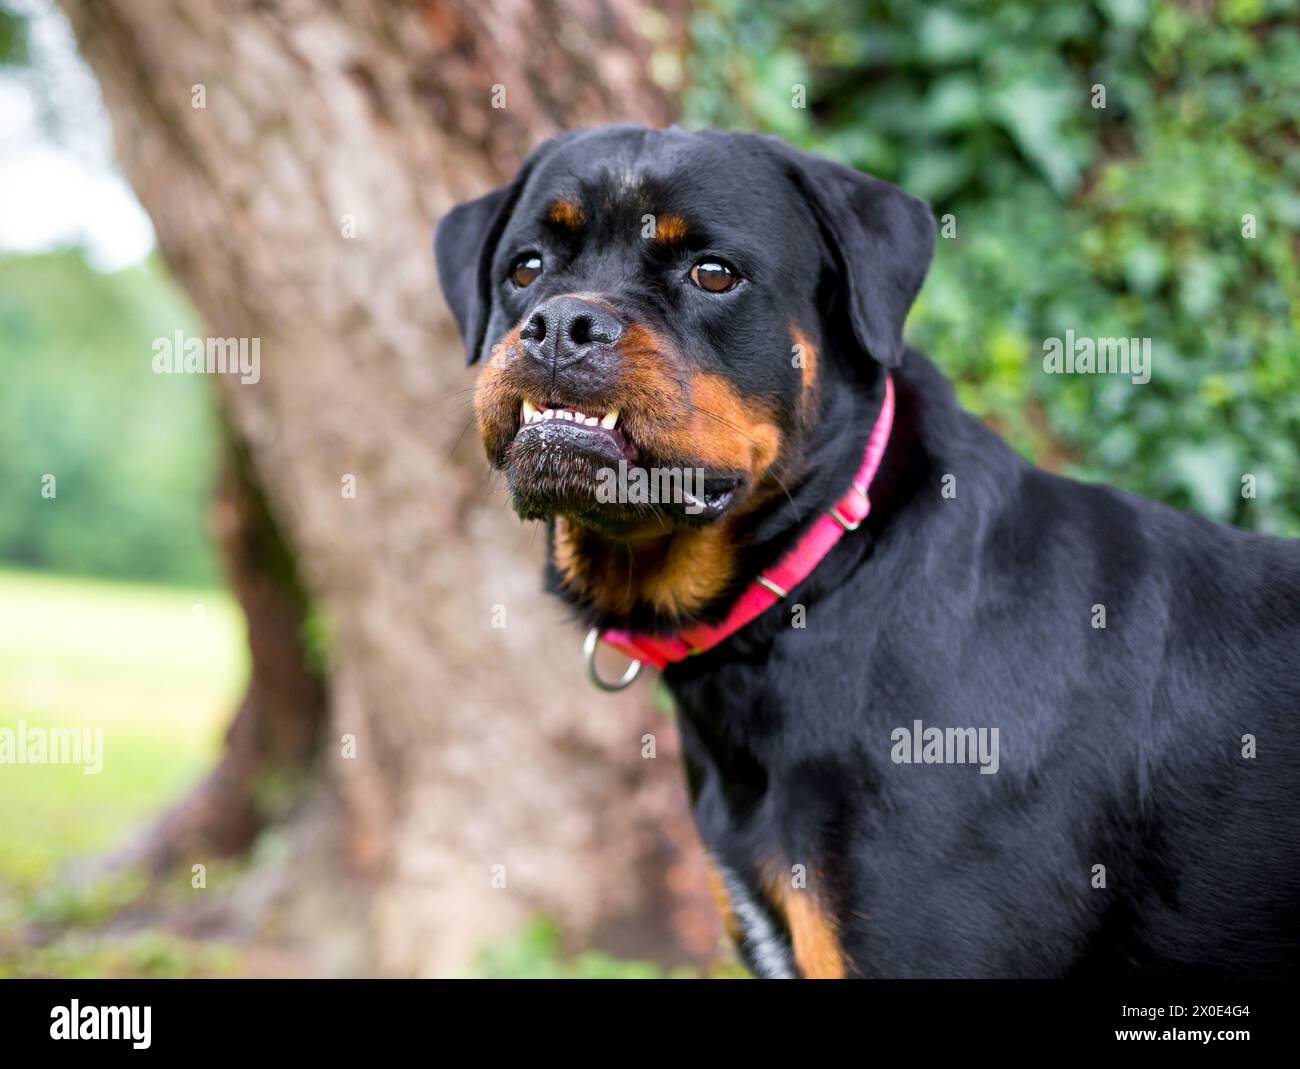 A purebred Rottweiler dog with an underbite and its lower teeth protruding Stock Photo